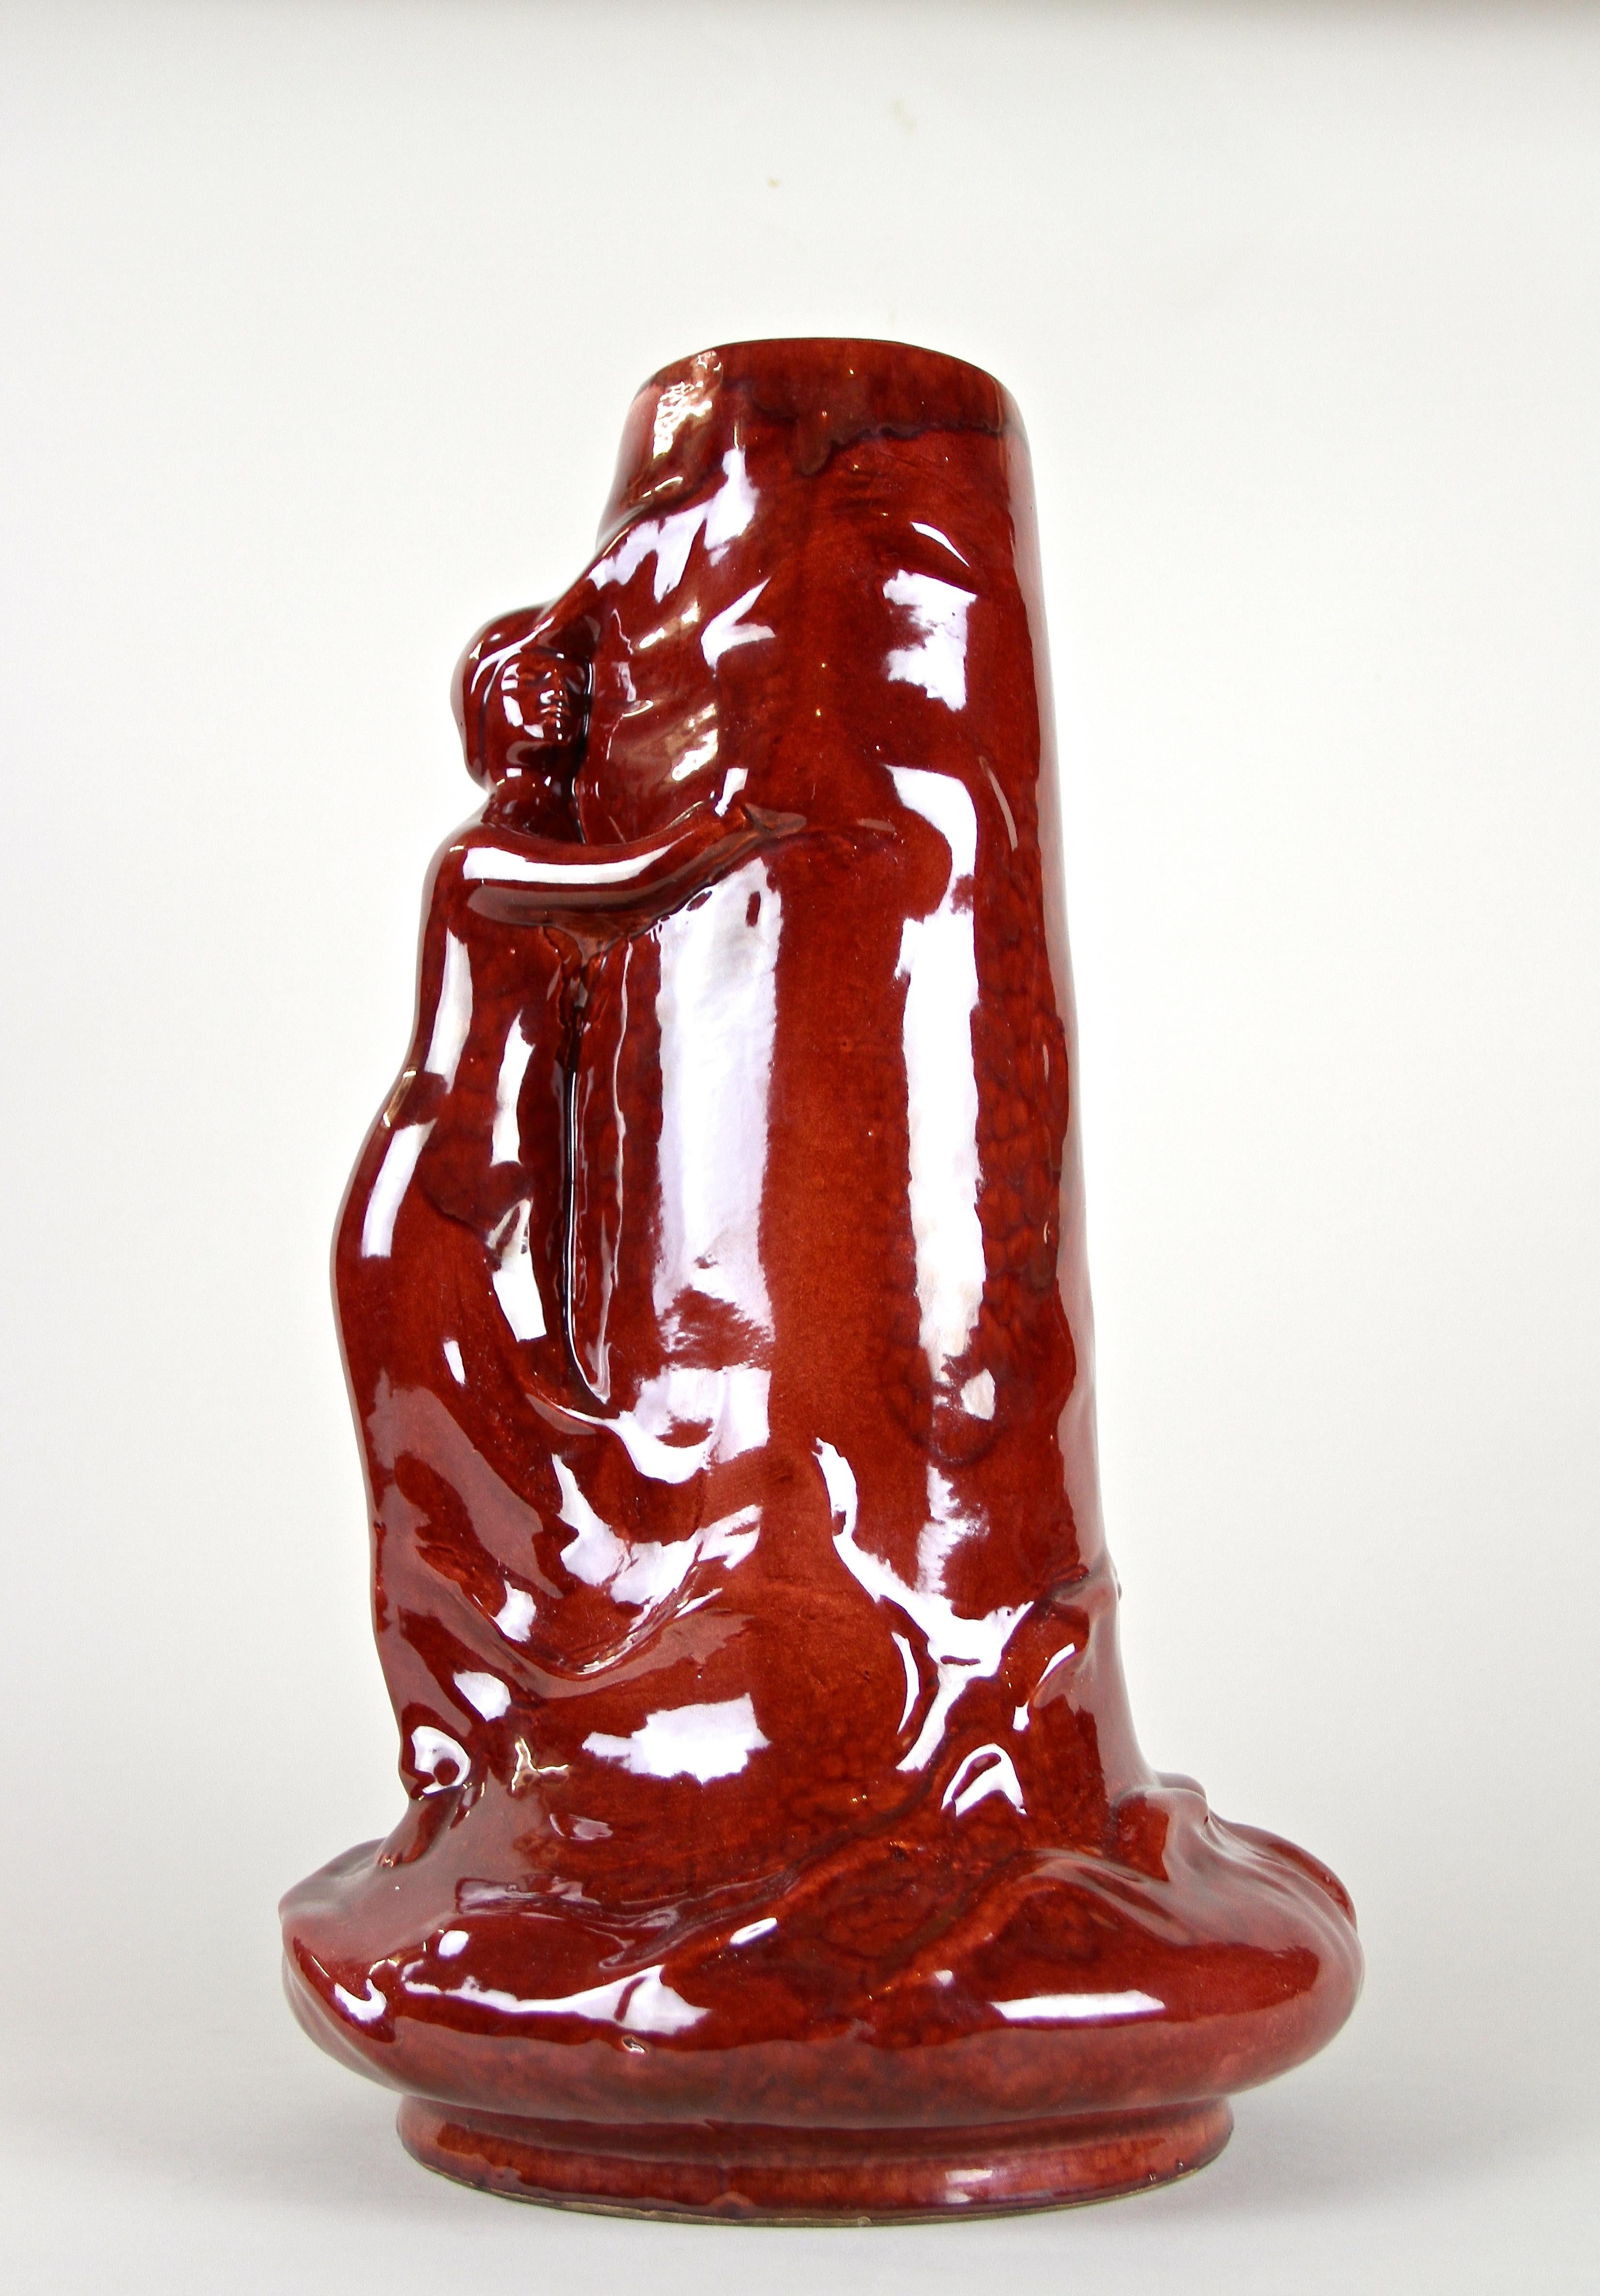 Porcelain Faience Vase with Red Eosin Glaze by Zsolnay Art Nouveau, Hungary 1899 4